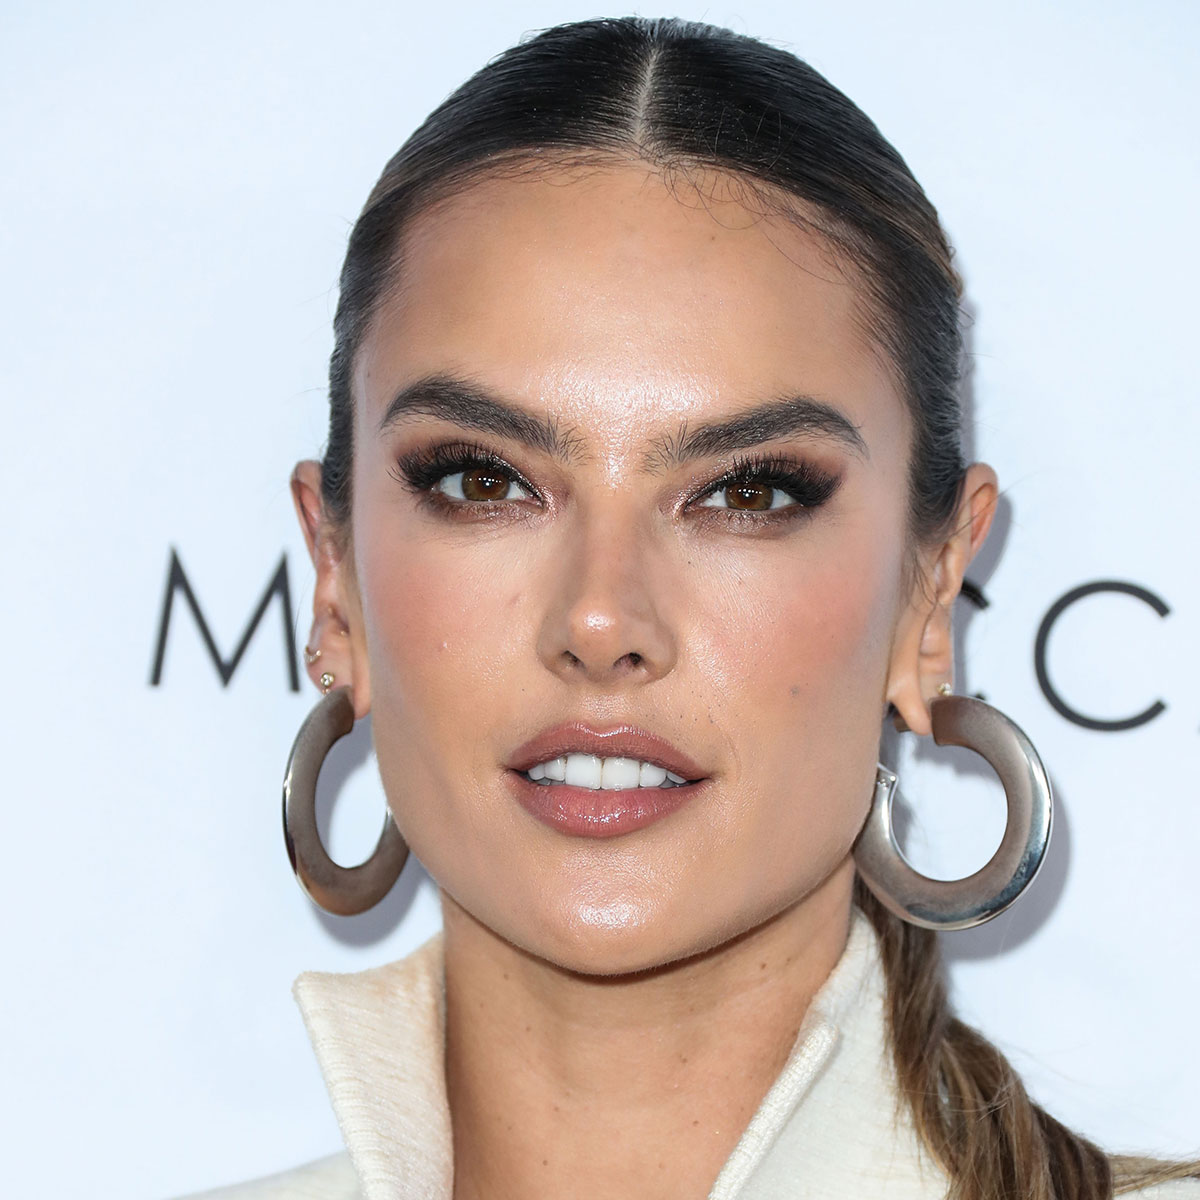 Alessandra Ambrosio Shows Off Her Ageless Beauty In Colorful